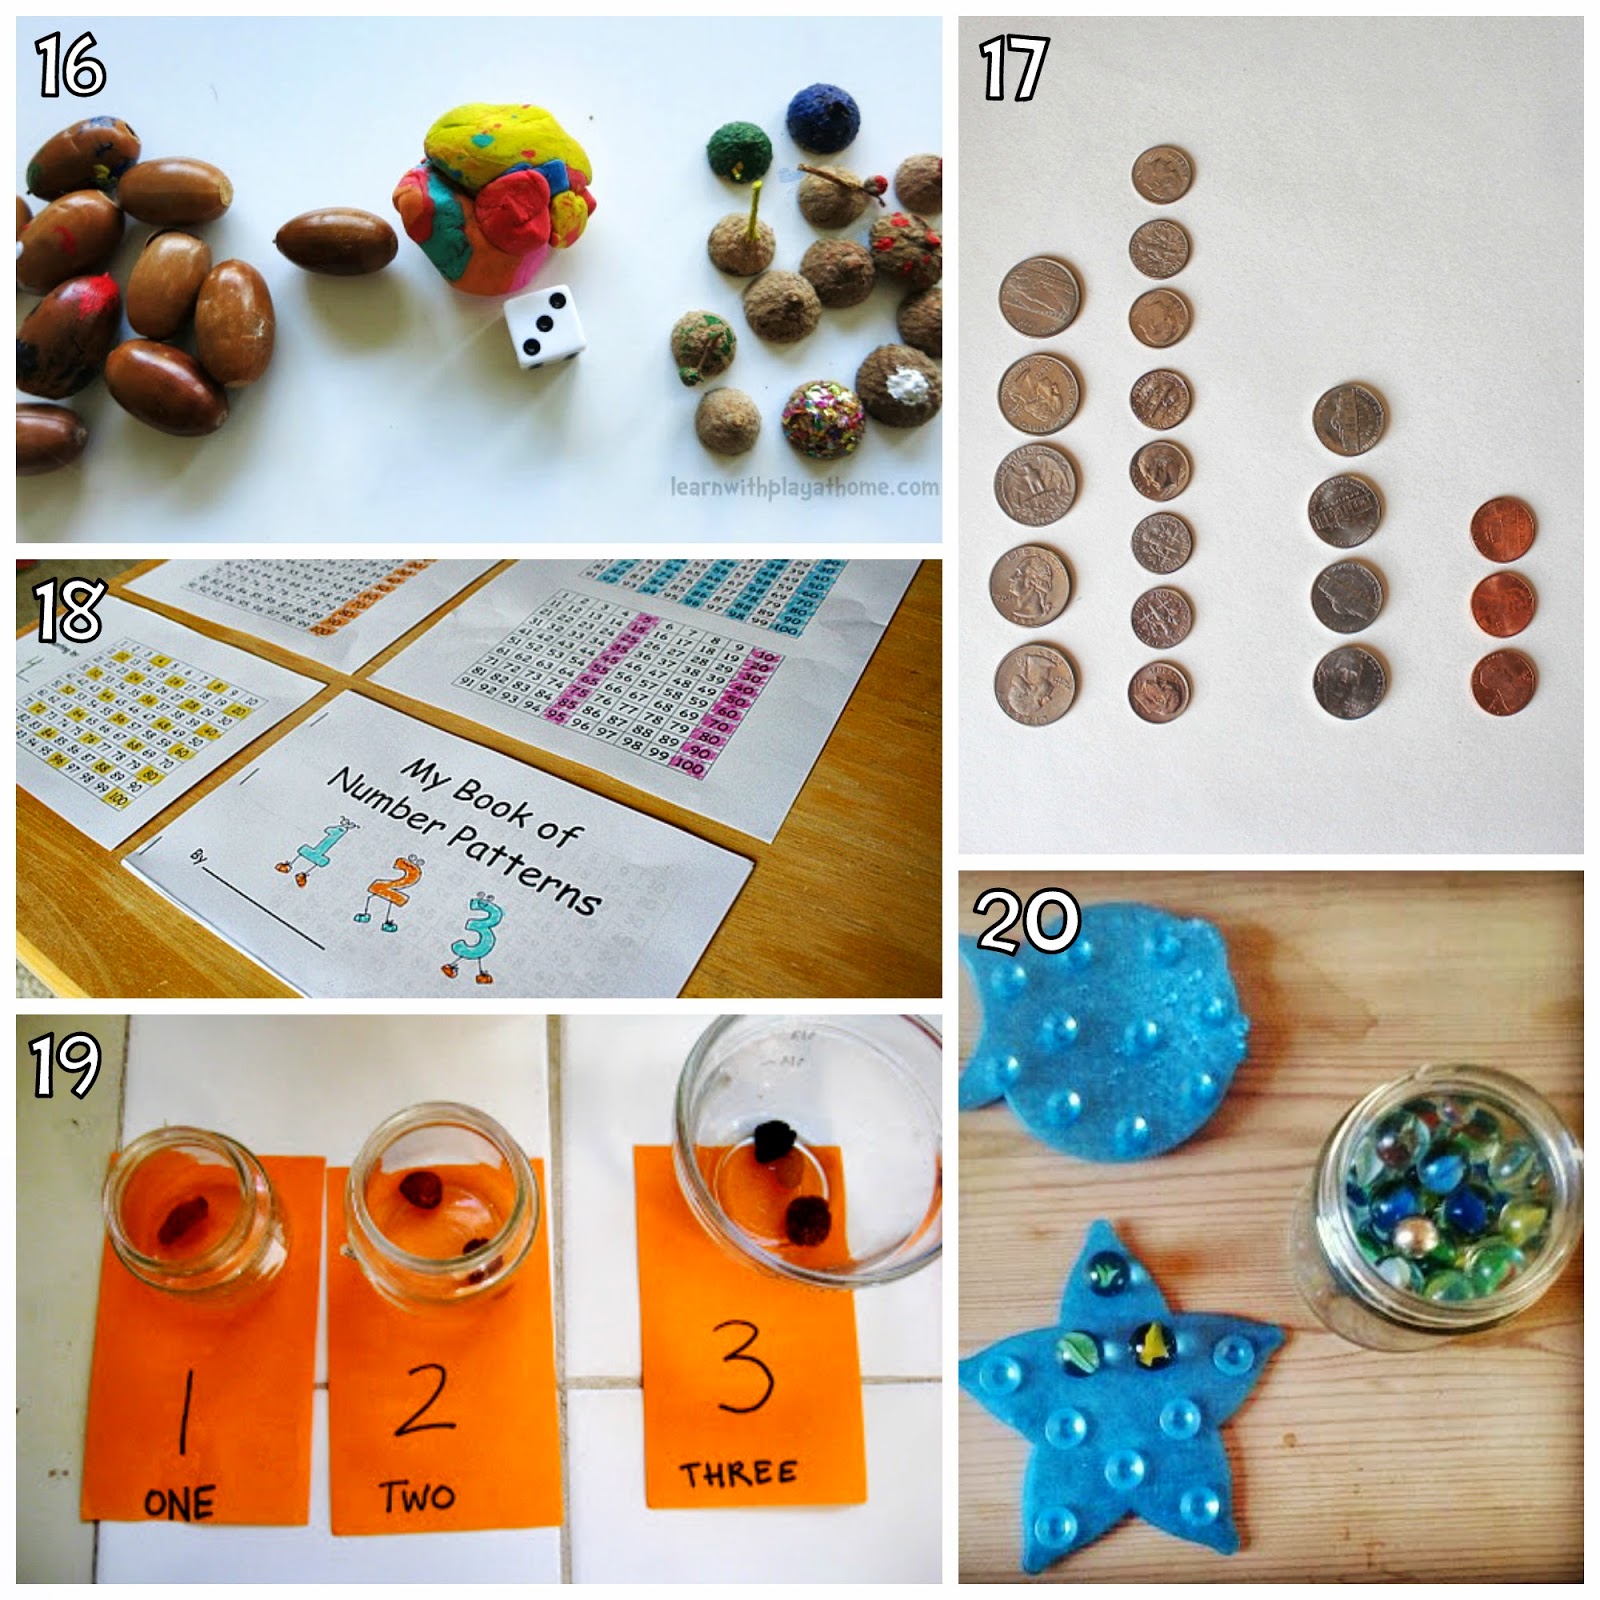 Learn with Play at Home: 30 Counting Activities for Kids